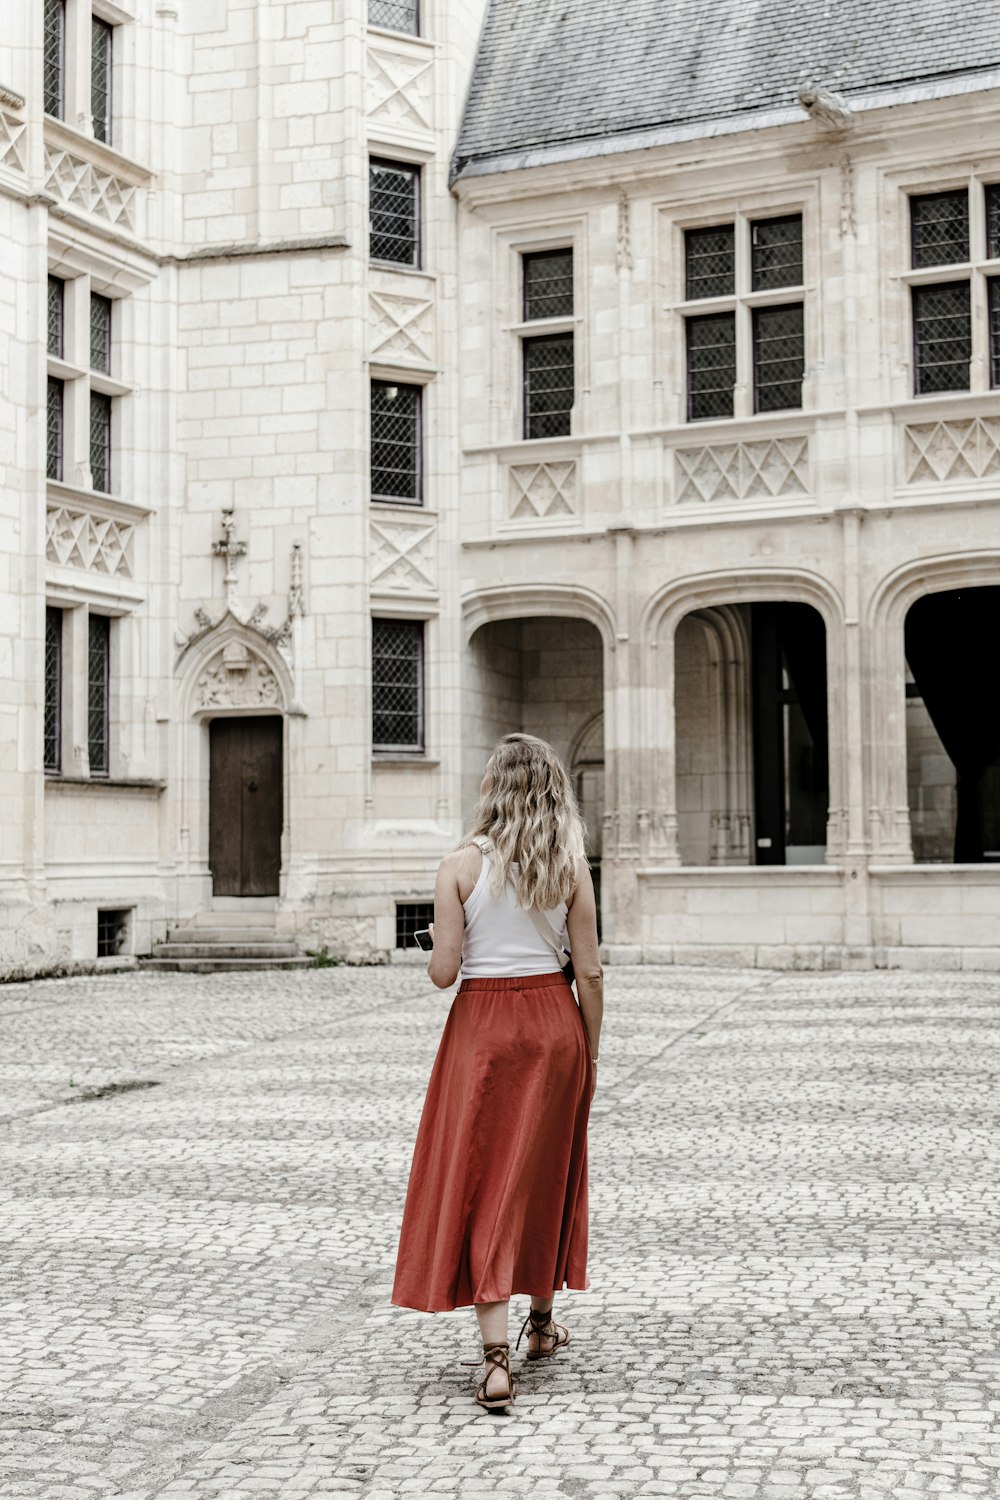 a woman in a red skirt is standing in front of a large building